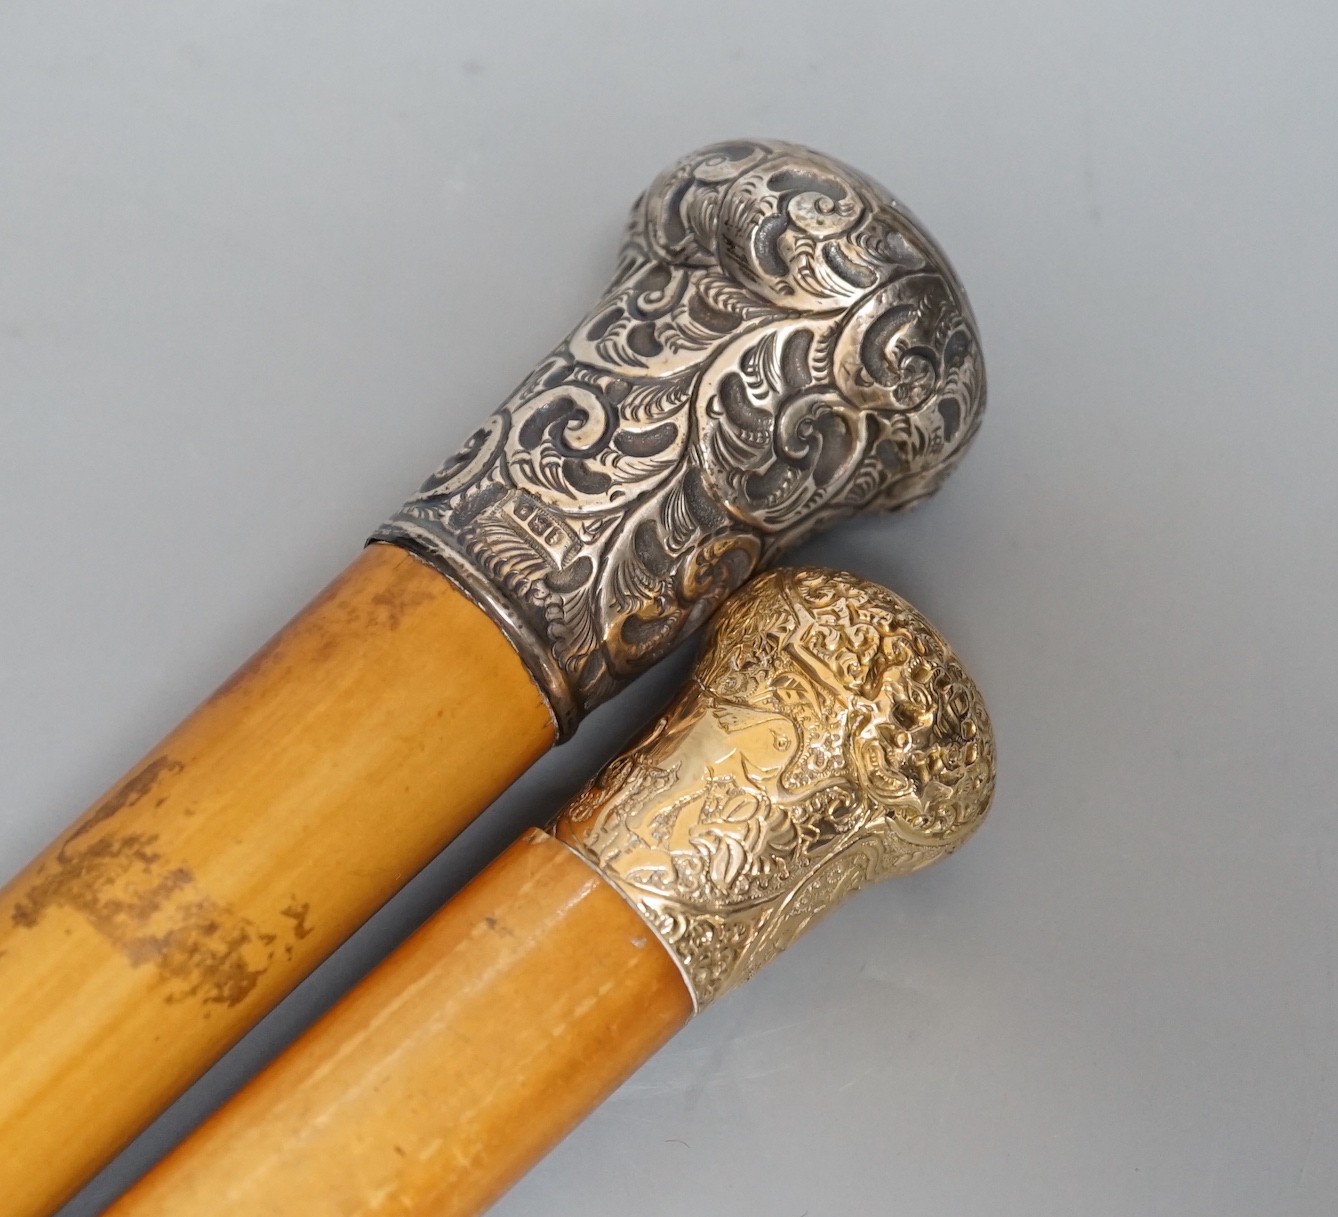 Two 19th century malacca walking canes: one with an Indian inspired 9ct gold handle, the other with a silver embossed handle, gold handled cane 92 cms long